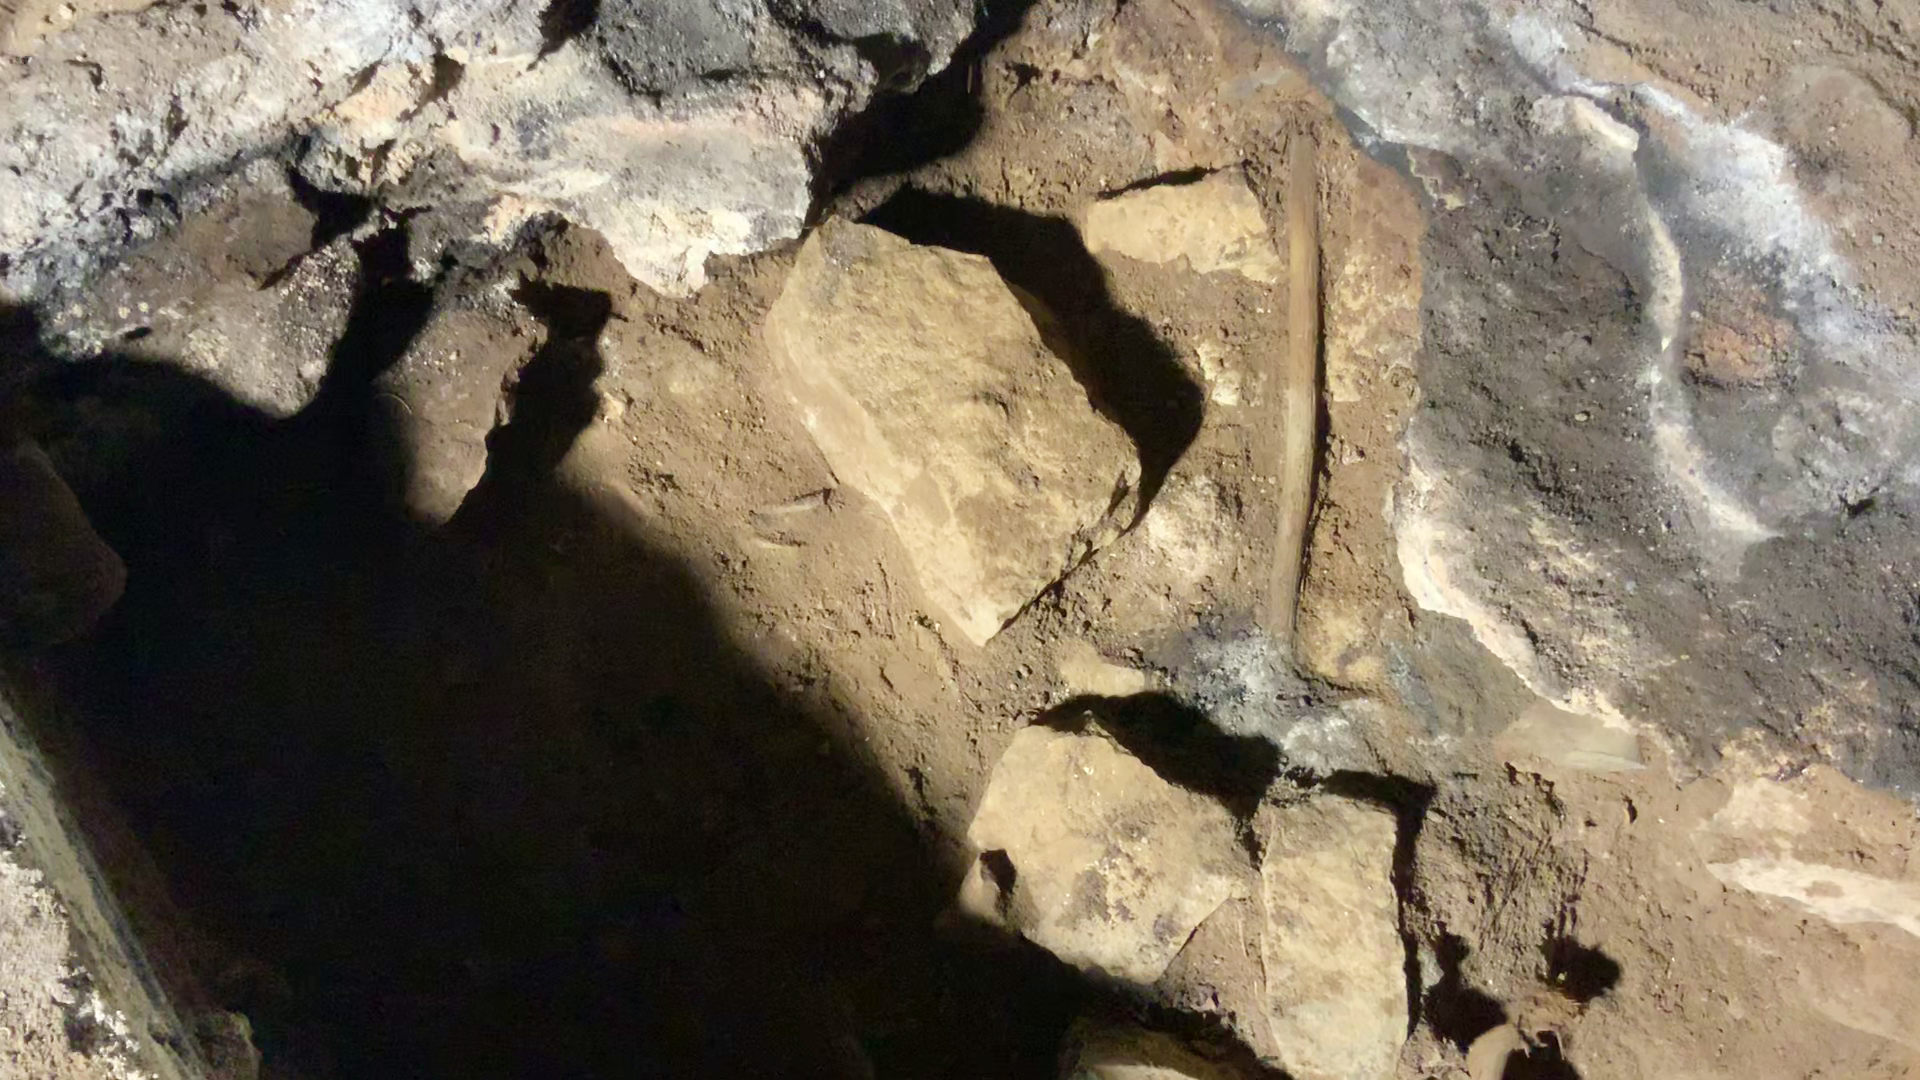 A photo of where the ritual sticks were found in the cave